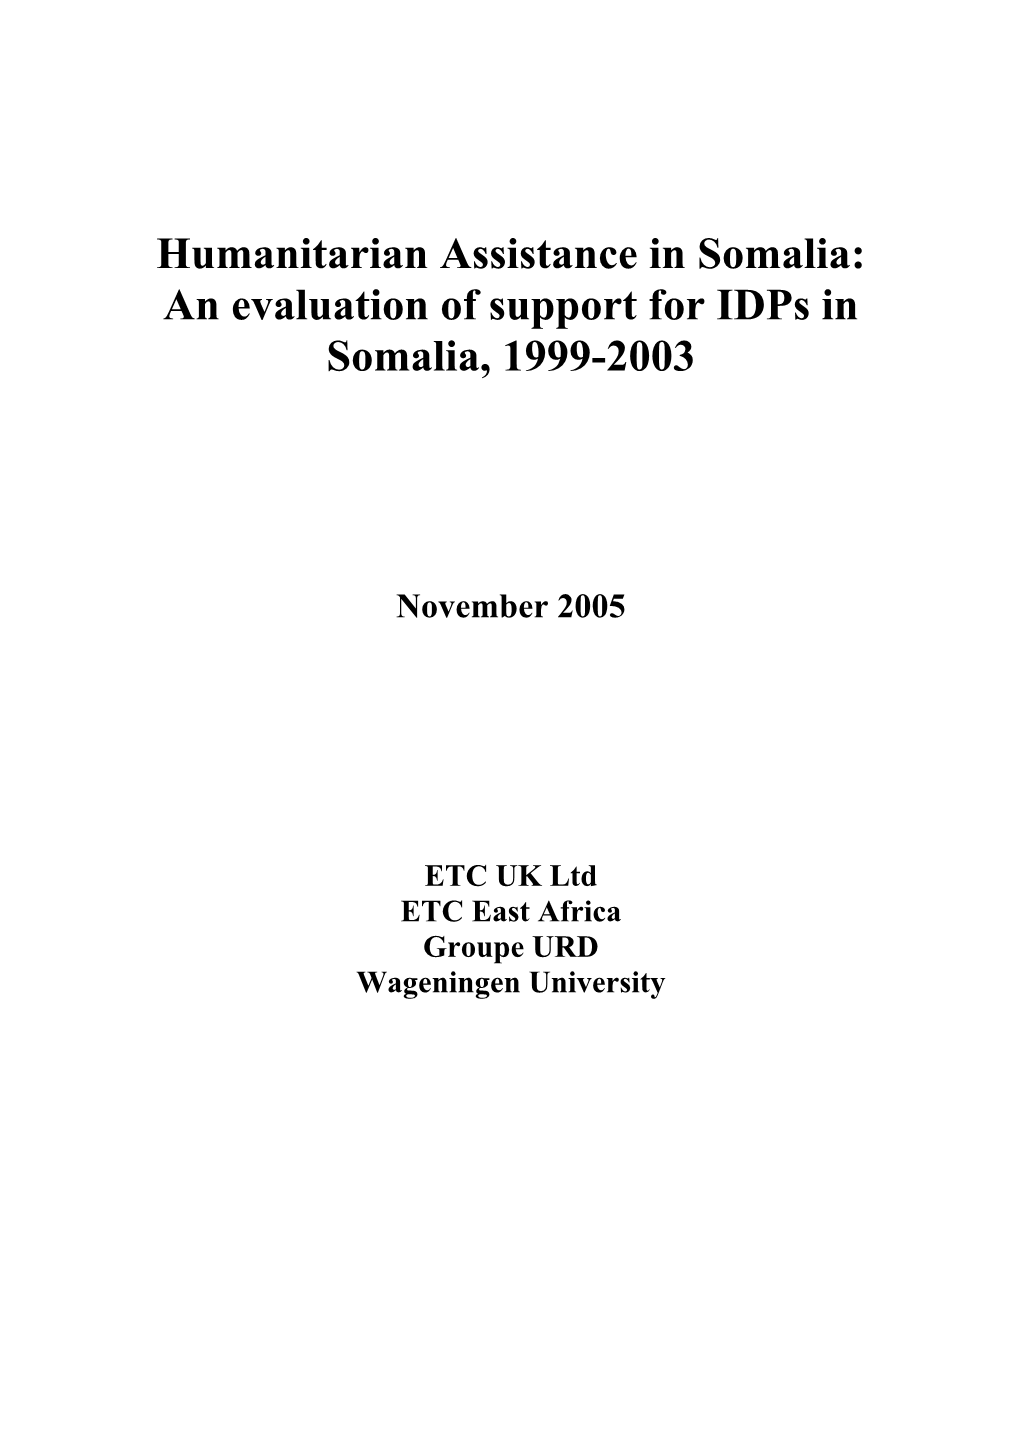 Humanitarian Assistance in Somalia: an Evaluation of Support for Idps in Somalia, 1999-2003